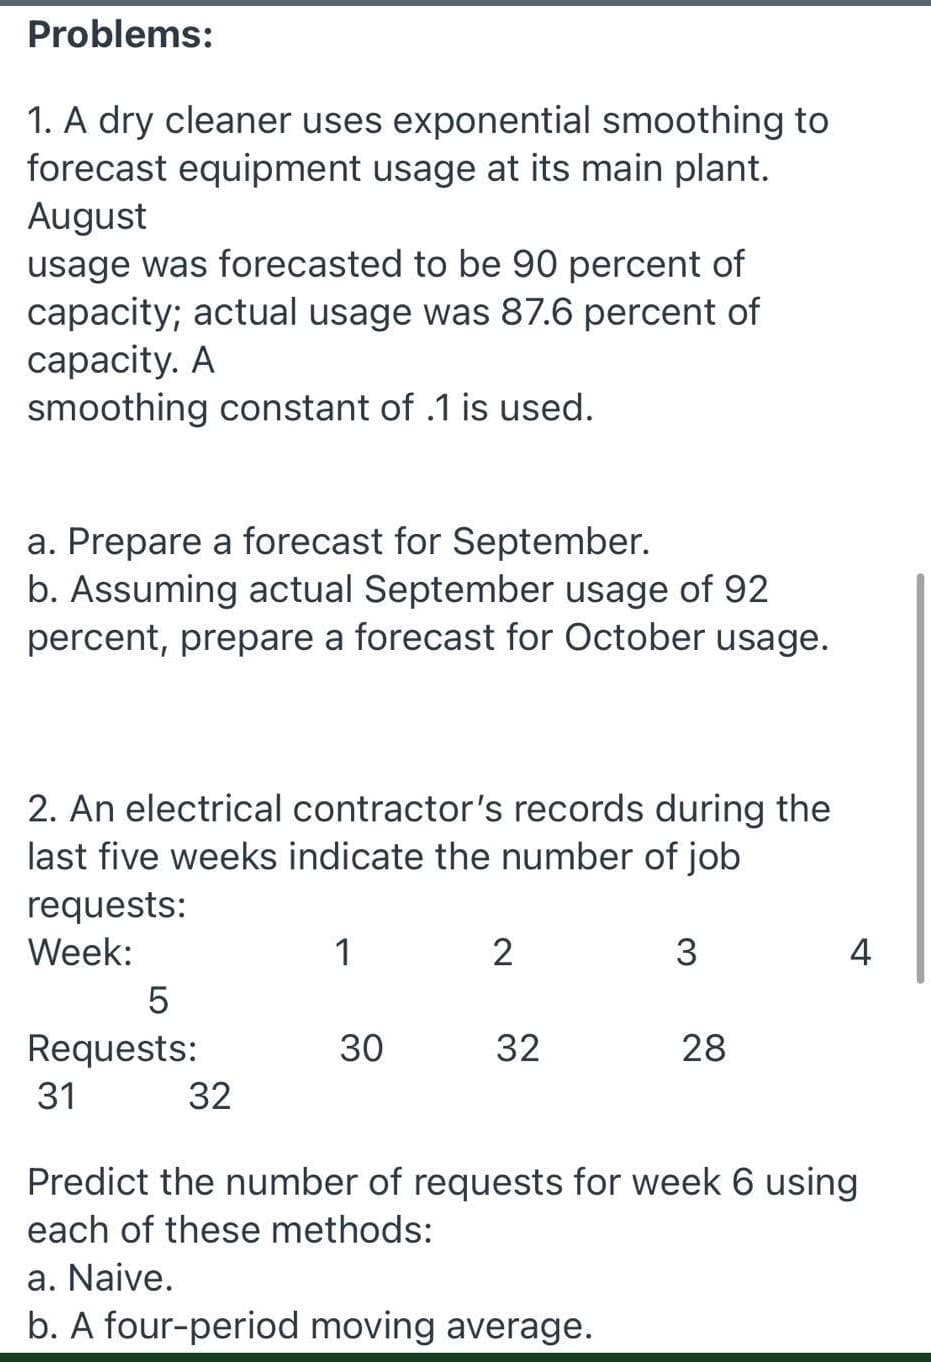 Problems:
1. A dry cleaner uses exponential smoothing to
forecast equipment usage at its main plant.
August
usage was forecasted to be 90 percent of
capacity; actual usage was 87.6 percent of
сарacity. A
smoothing constant of .1 is used.
a. Prepare a forecast for September.
b. Assuming actual September usage of 92
percent, prepare a forecast for October usage.
2. An electrical contractor's records during the
last five weeks indicate the number of job
requests:
Week:
3
4
30
32
28
Requests:
32
31
Predict the number of requests for week 6 using
each of these methods:
a. Naive.
b. A four-period moving average.
